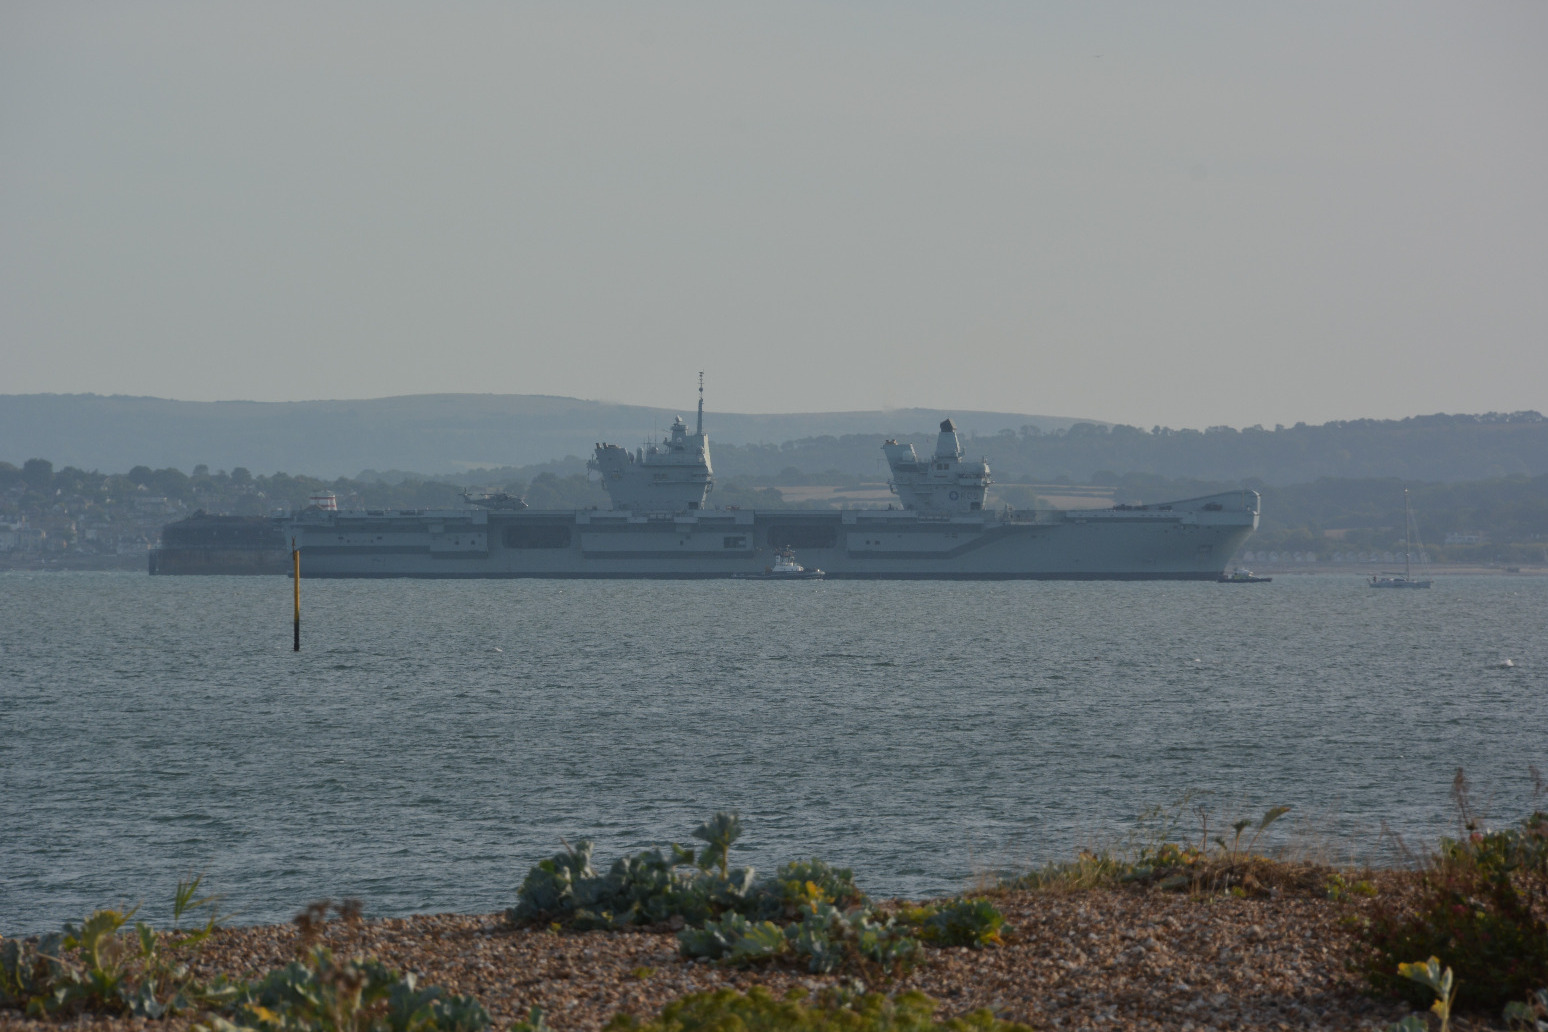 Navy carrier Prince of Wales limping back to shore after breaking down 